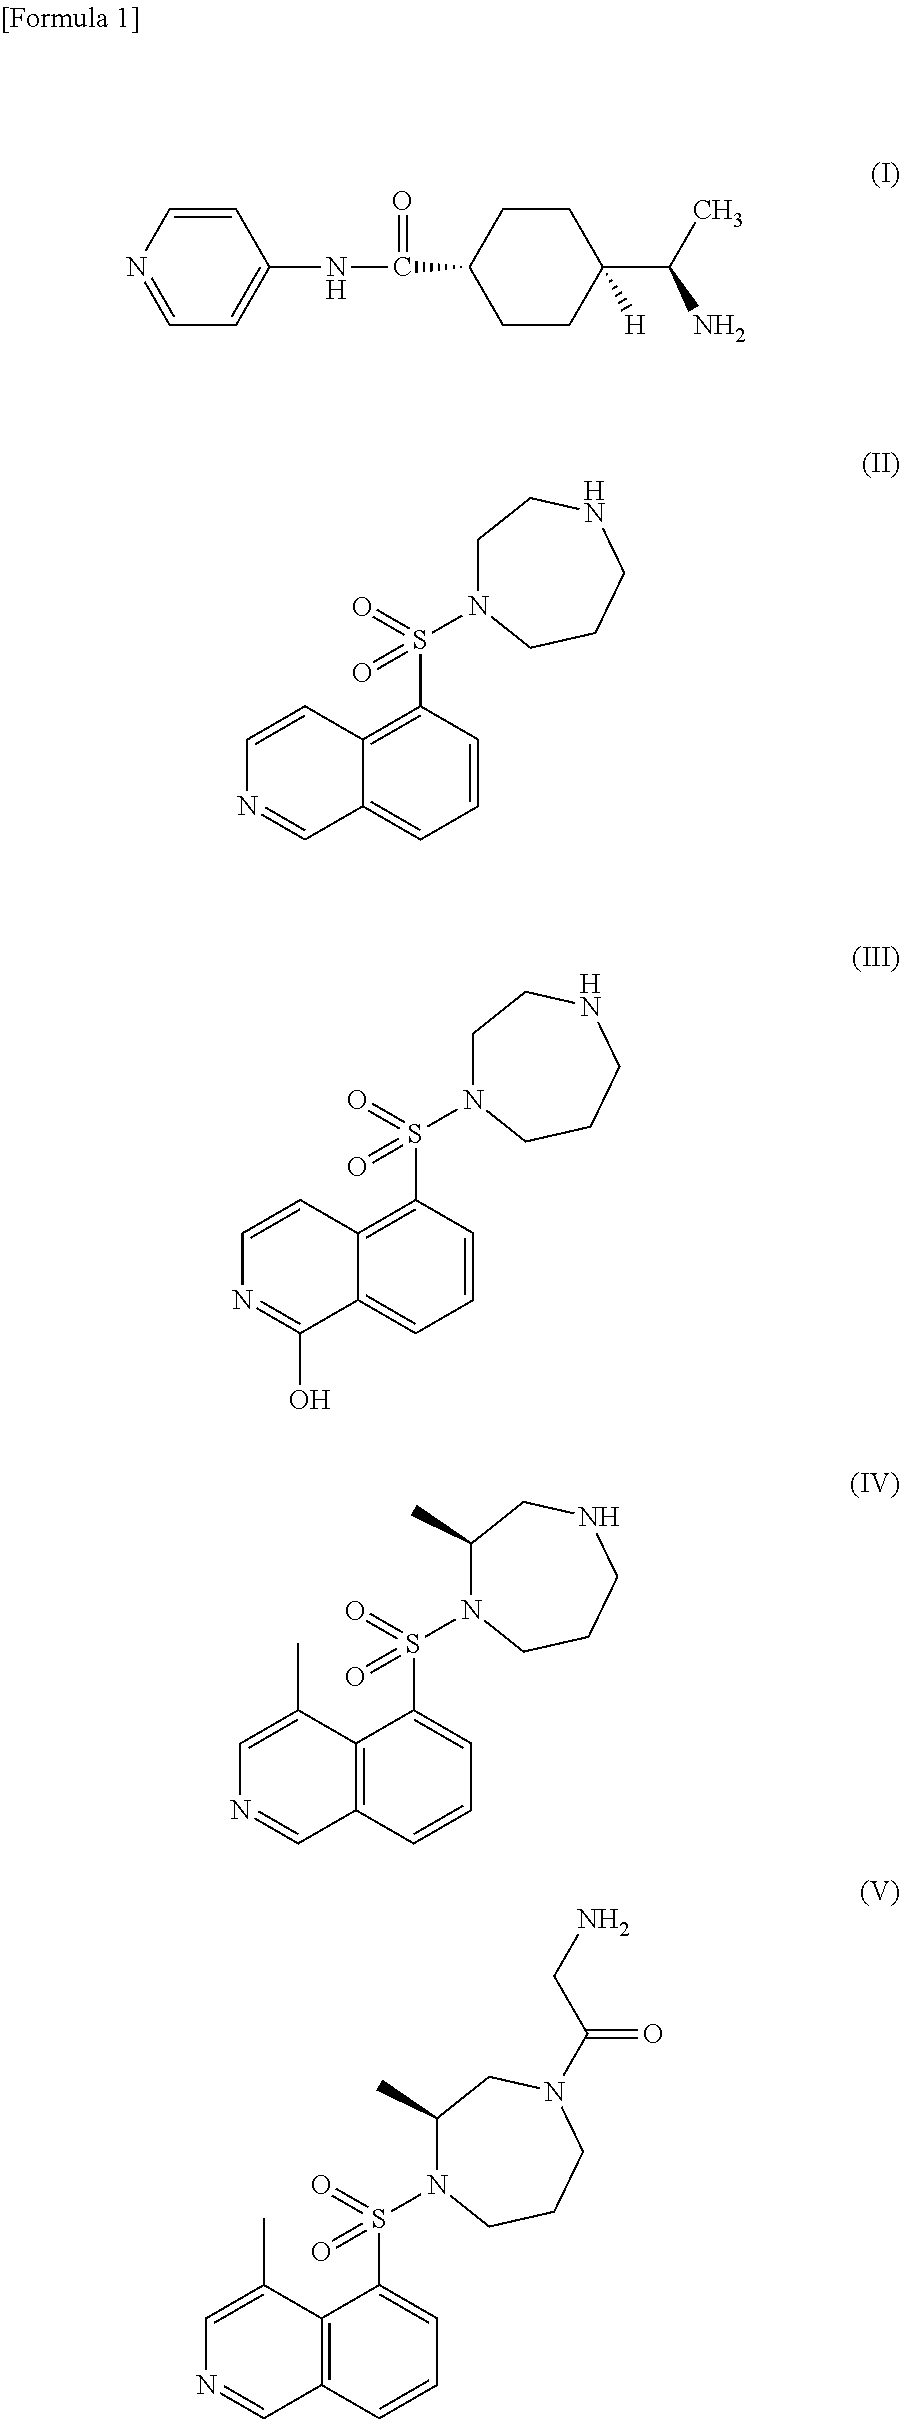 Prophylactic or therapeutic agent for axial myopia